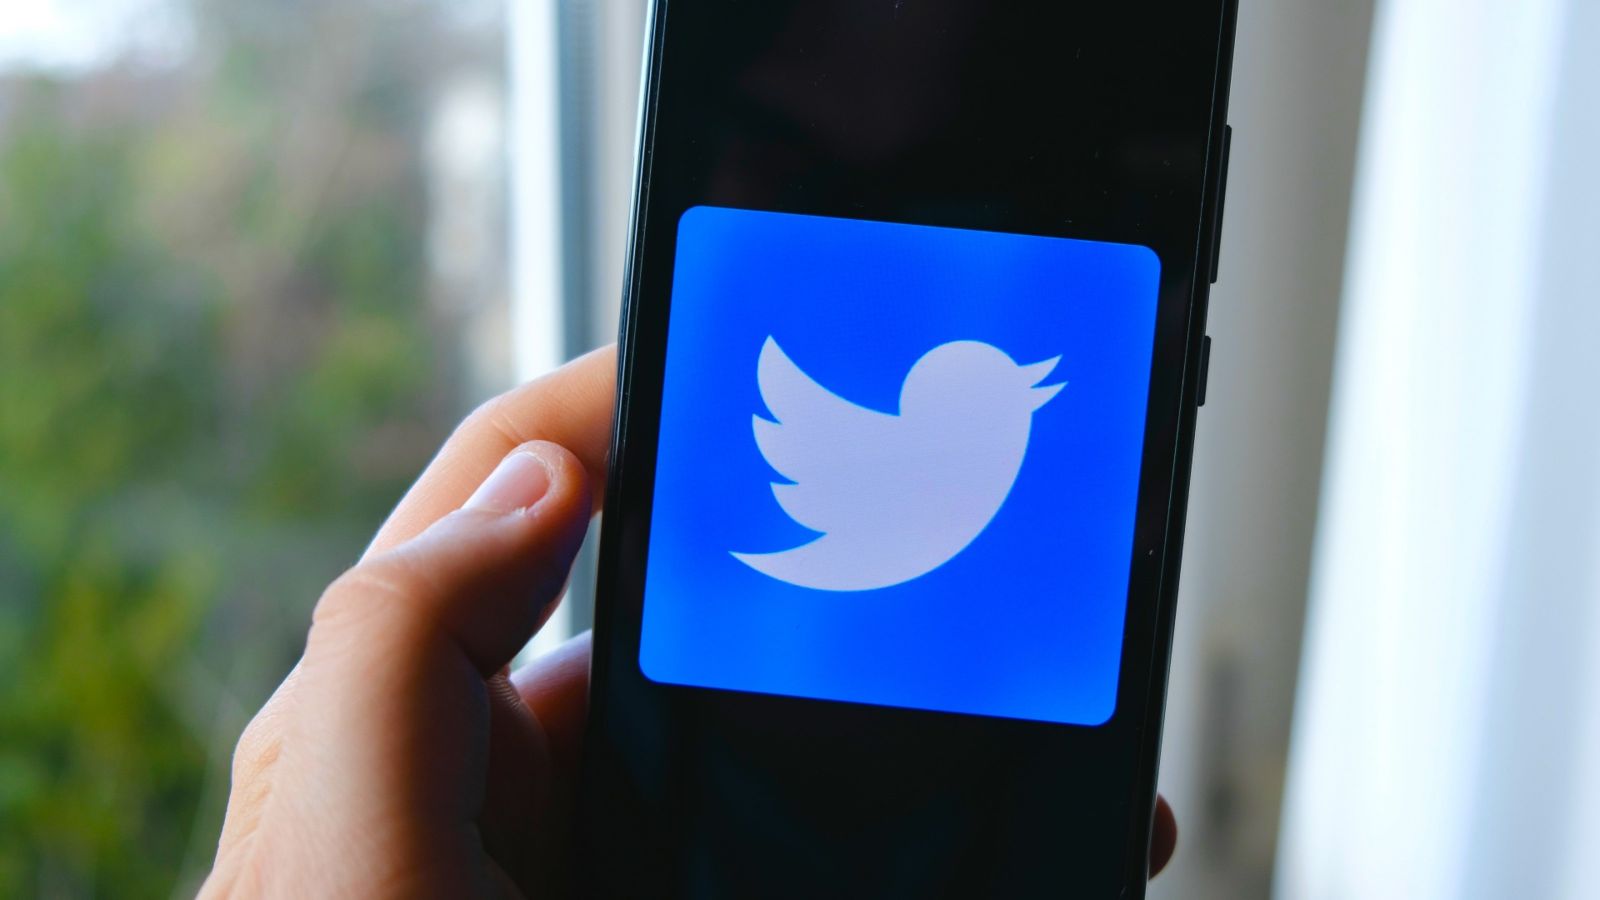 A hand holding a cellphone with the Twitter logo on the screen